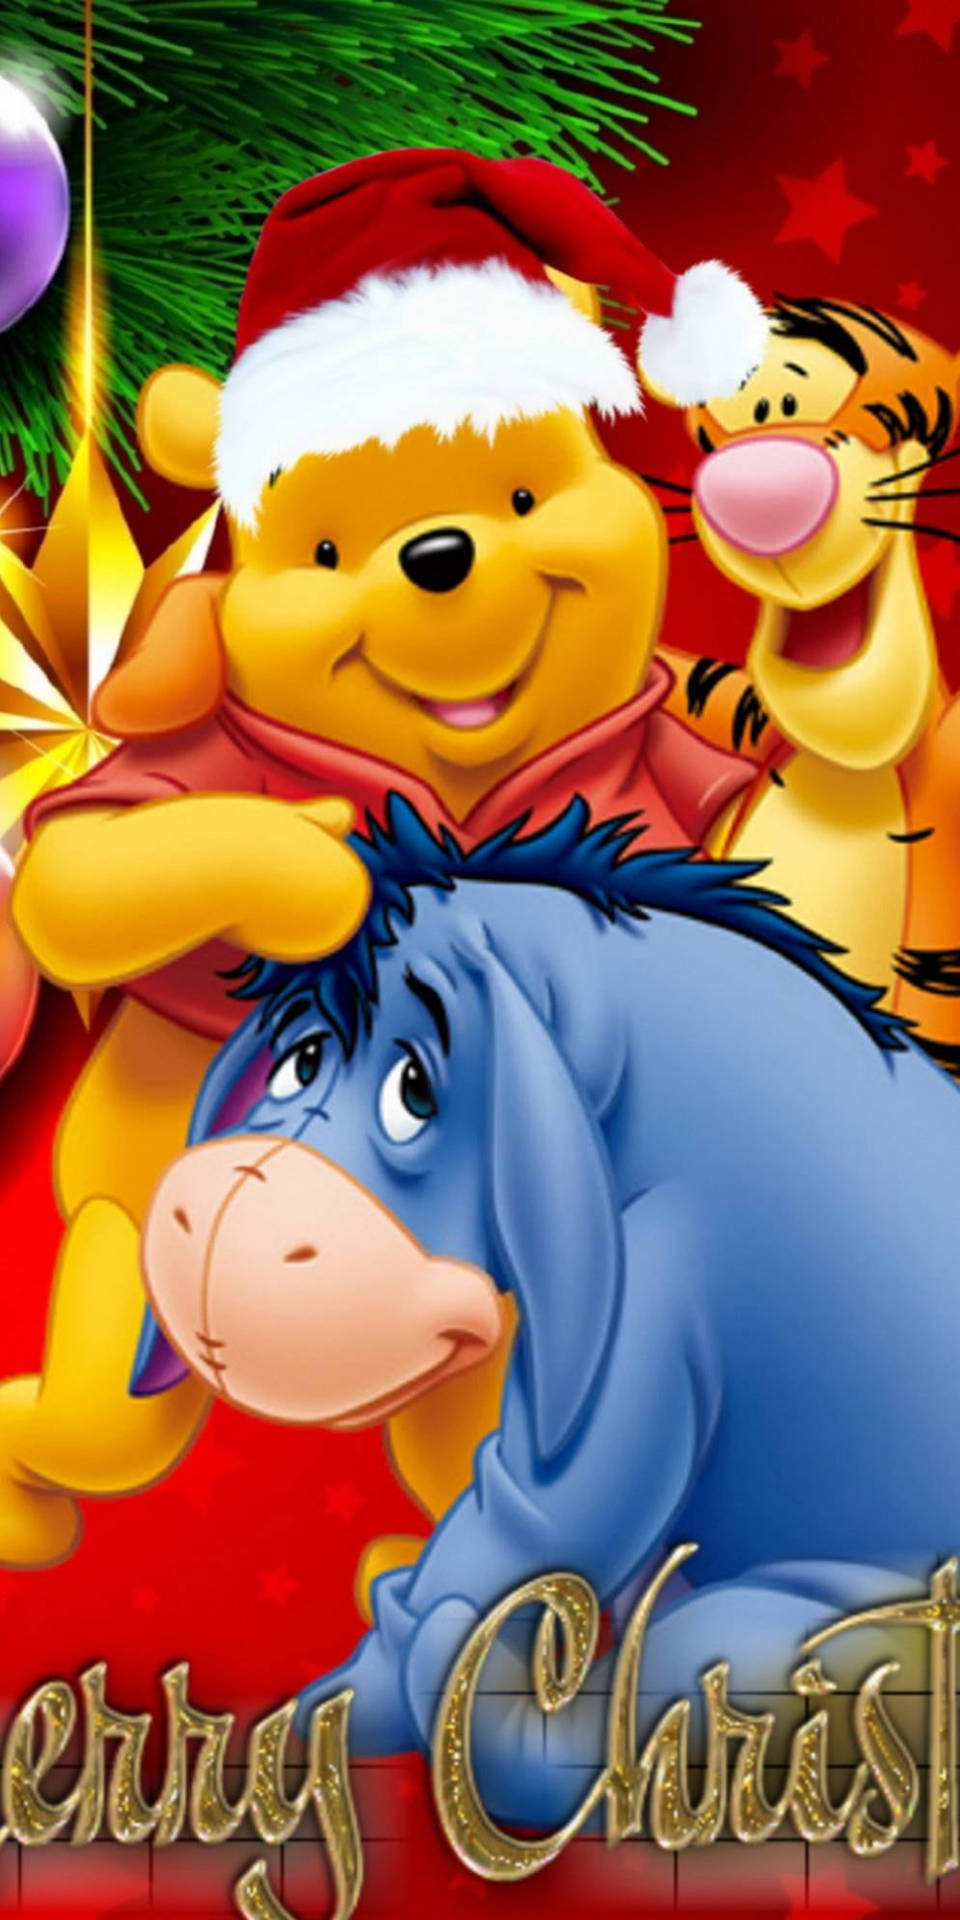 Adorable Winnie The Pooh Iphone Wallpaper Wallpaper